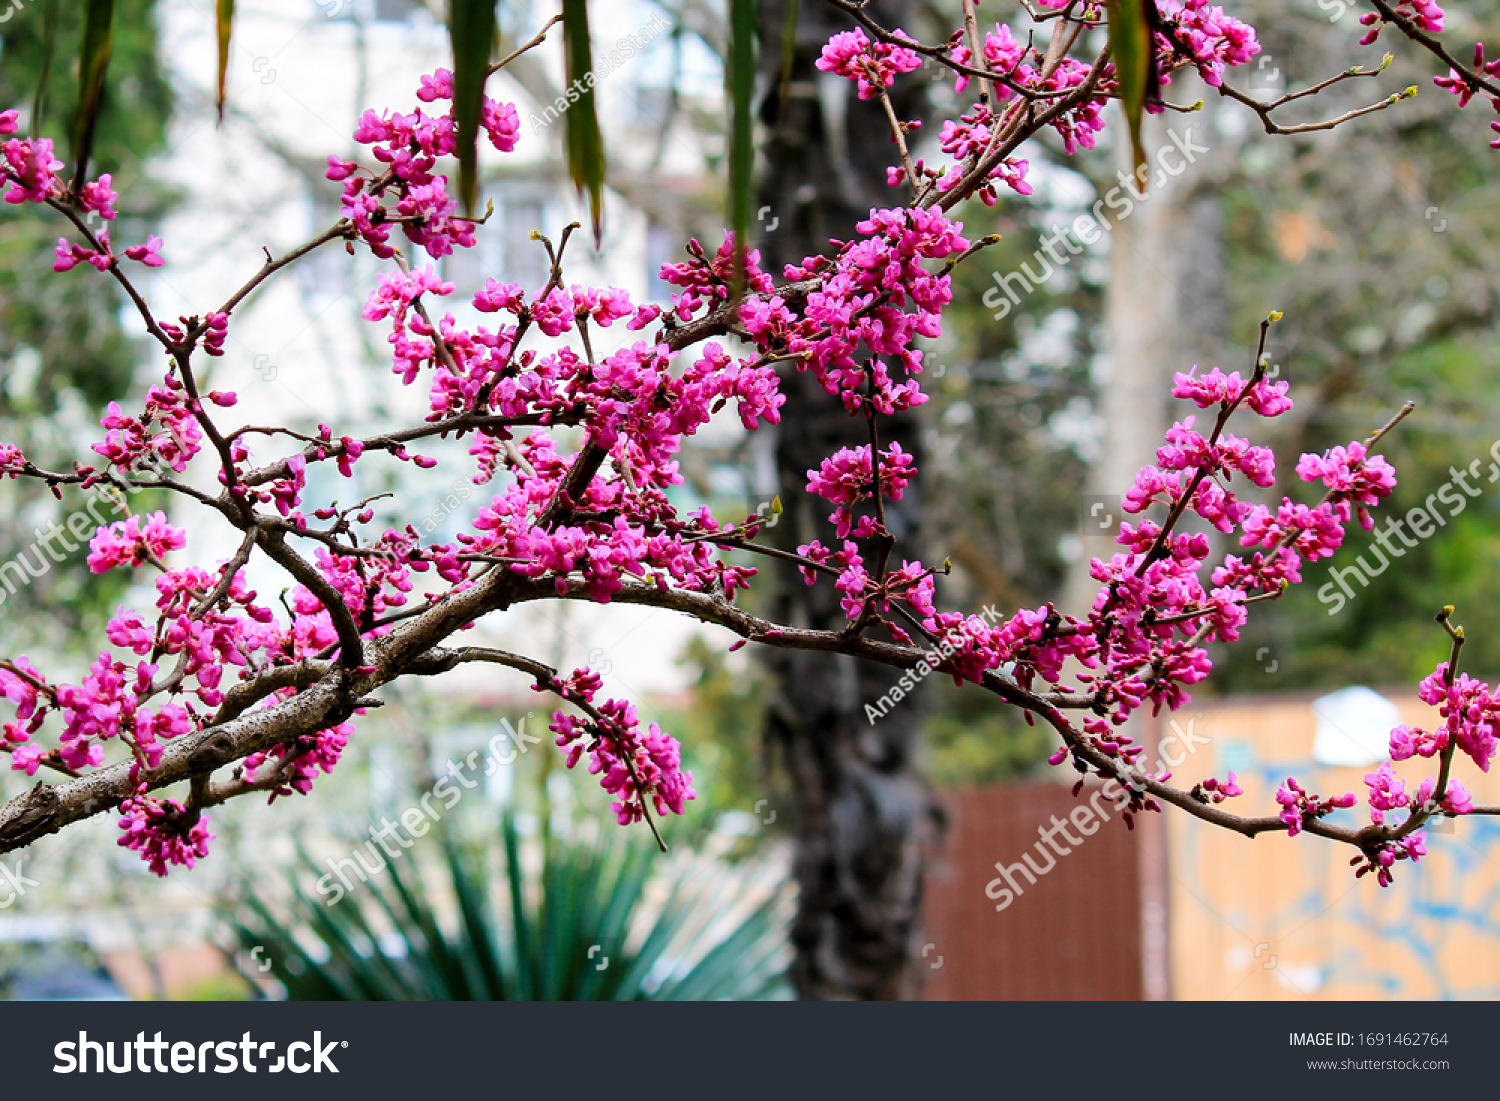 Beautiful lilac pink flowers blossomed on the plant Lingonaria Judas tree Cercis in spring in the park #1691462764